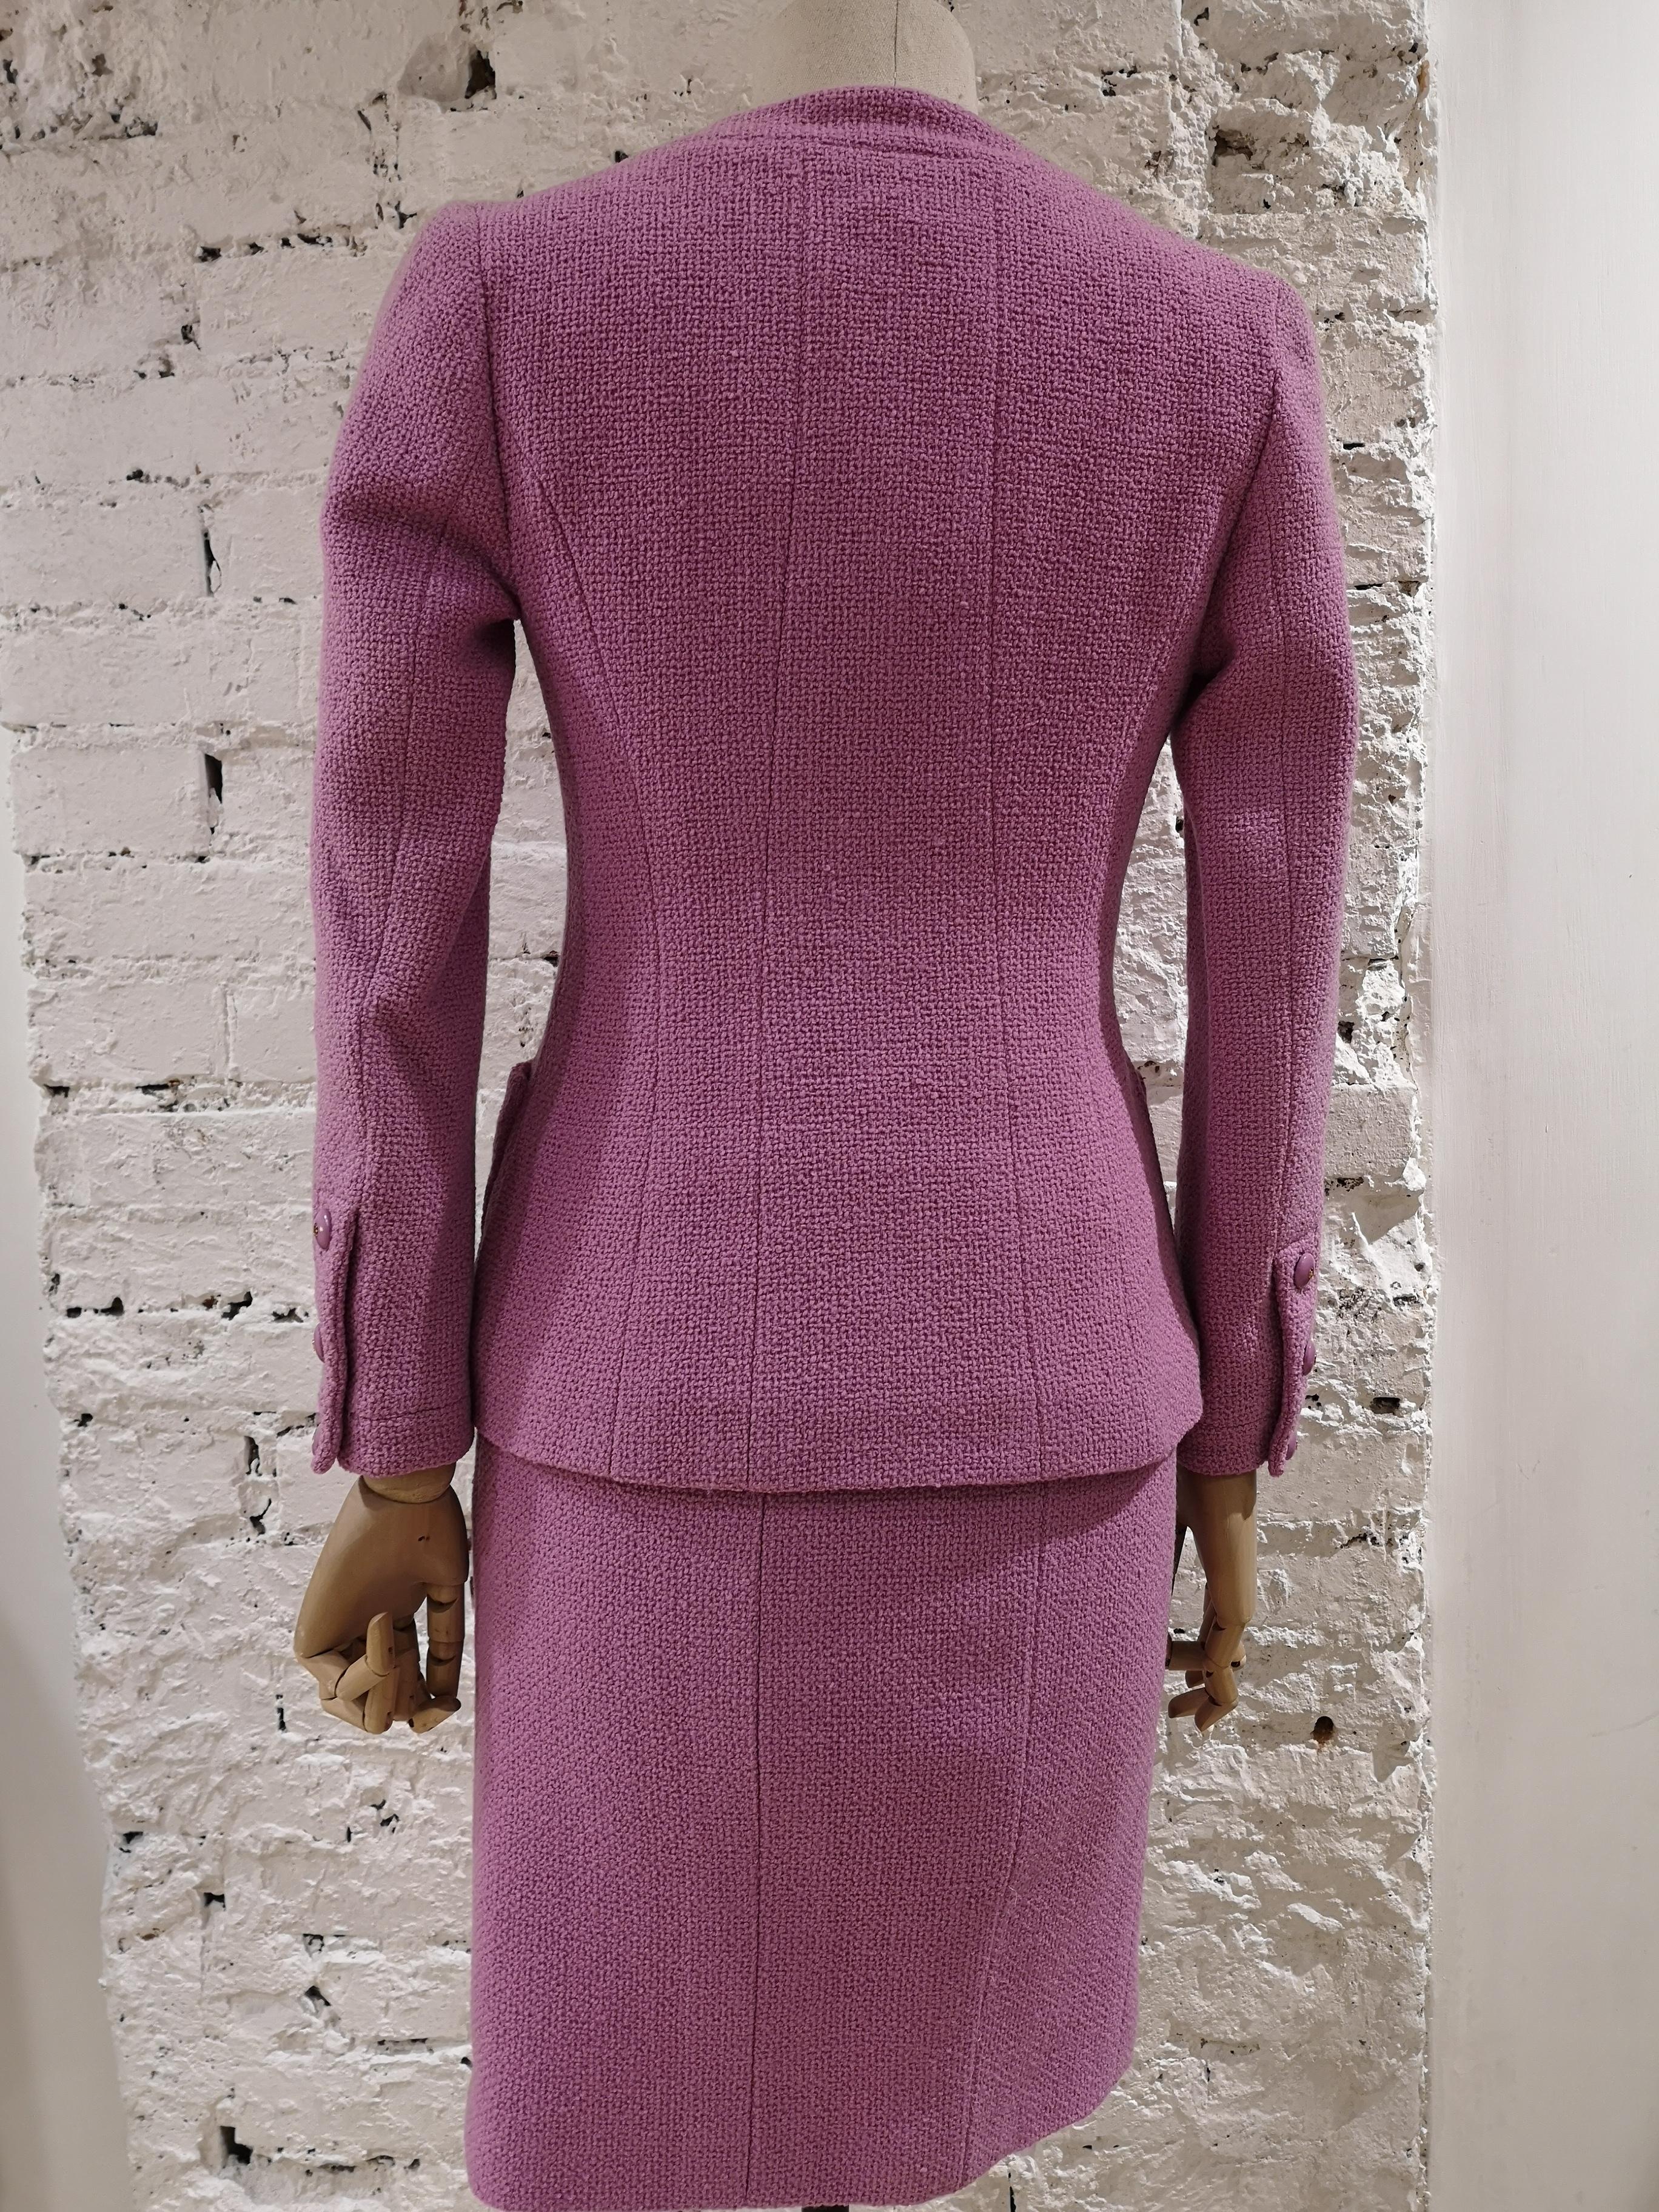 Chanel wisteria Wool Skirt Suit 3